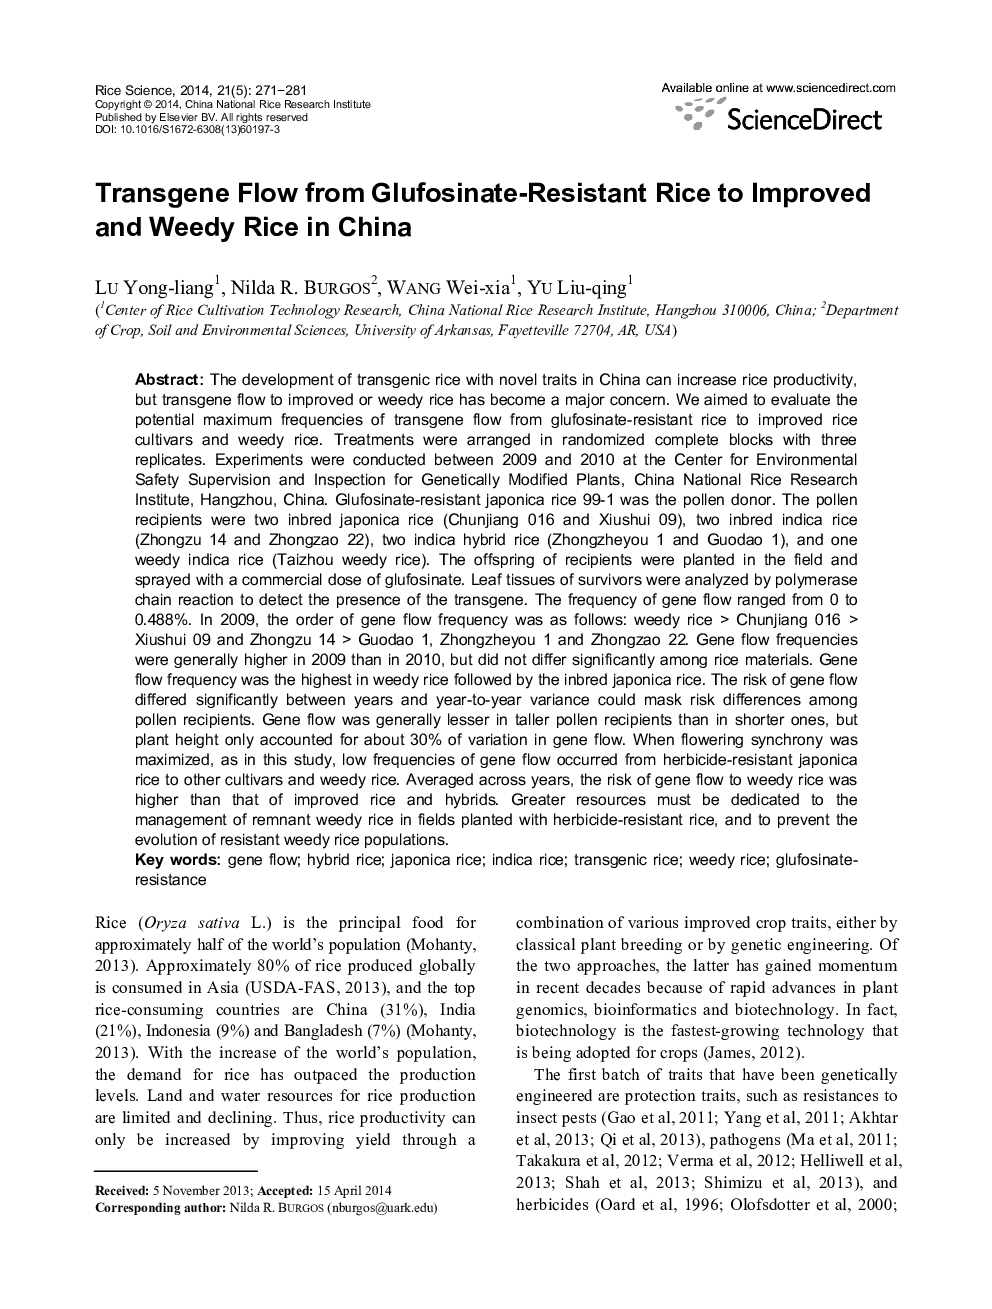 Transgene Flow from Glufosinate-Resistant Rice to Improved and Weedy Rice in China